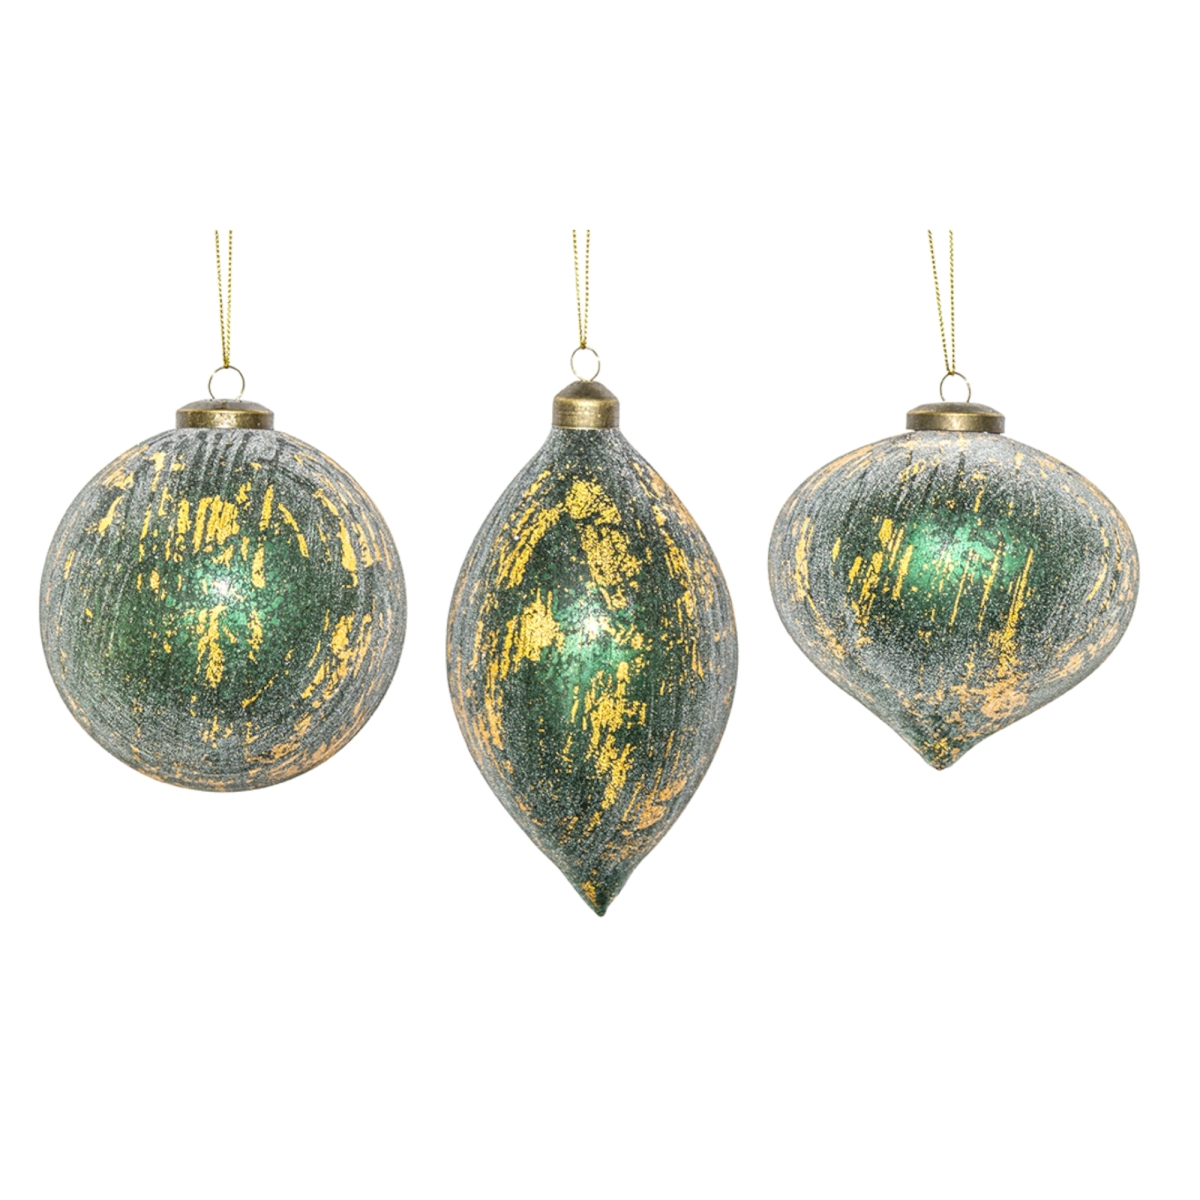 73090ds 5.25-5.5 & 7.25 In. Glass Ornament, Green & Gold - Set Of 6